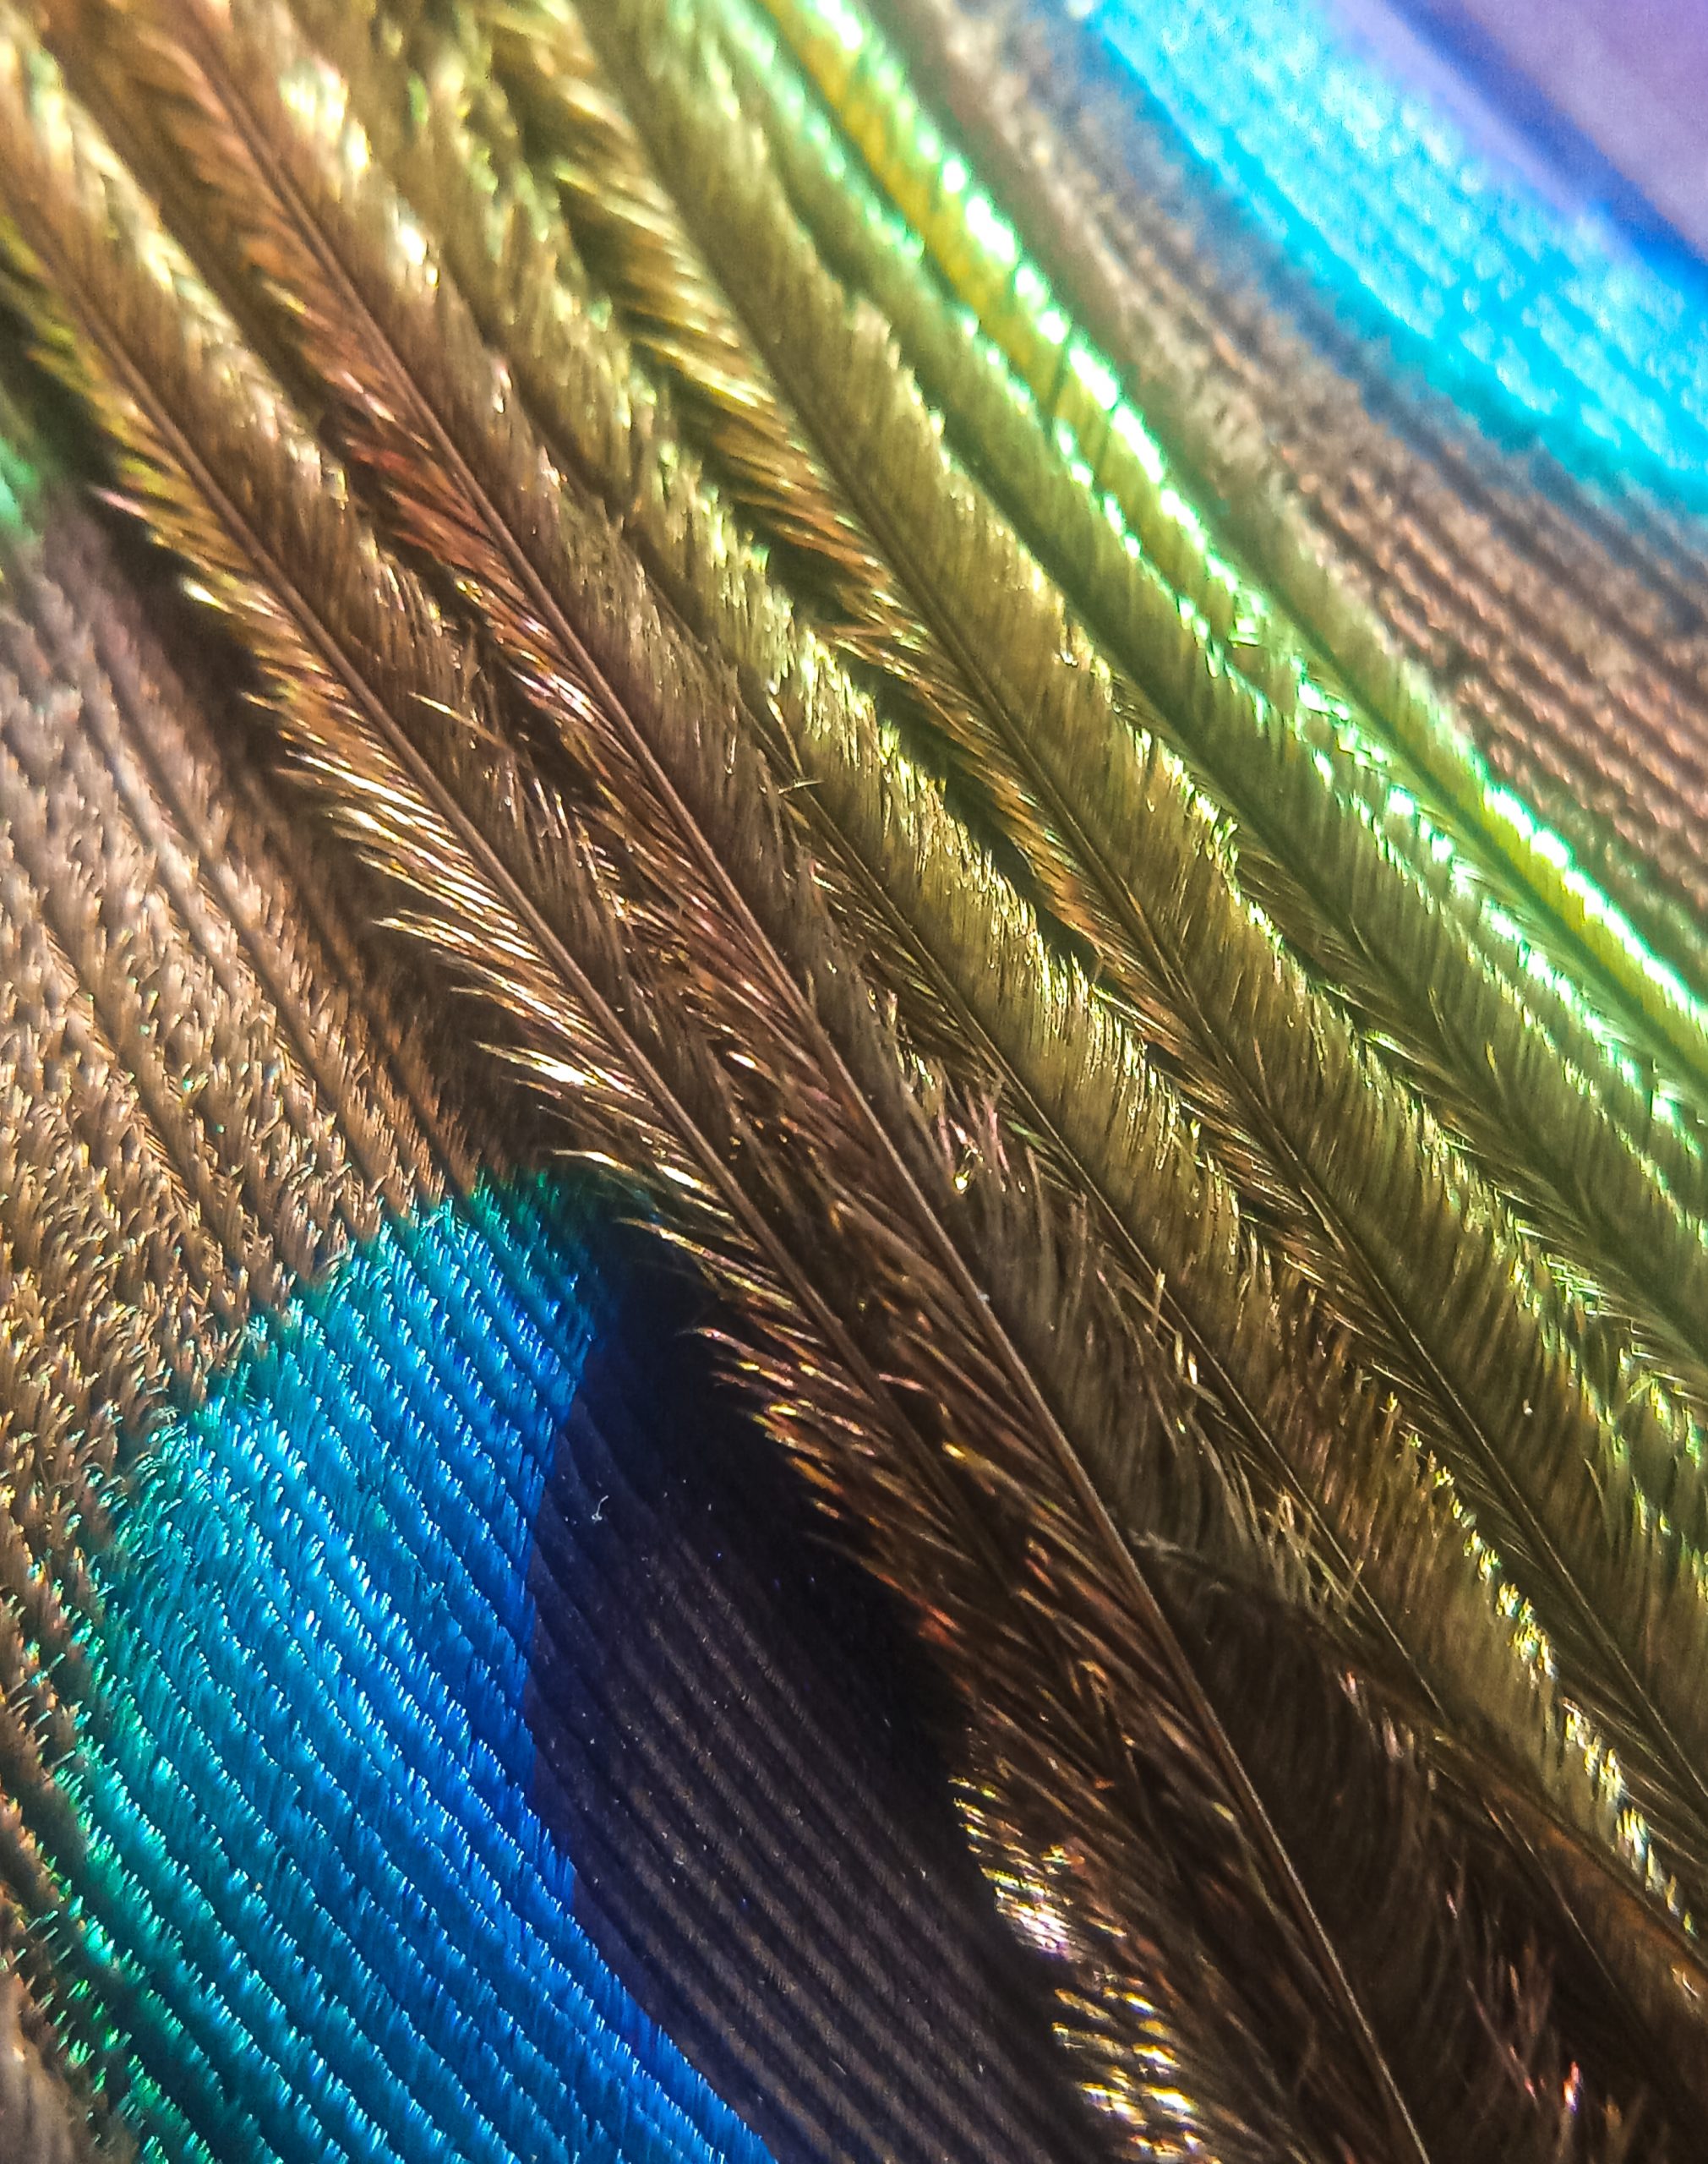 Peacock Feather on Focus